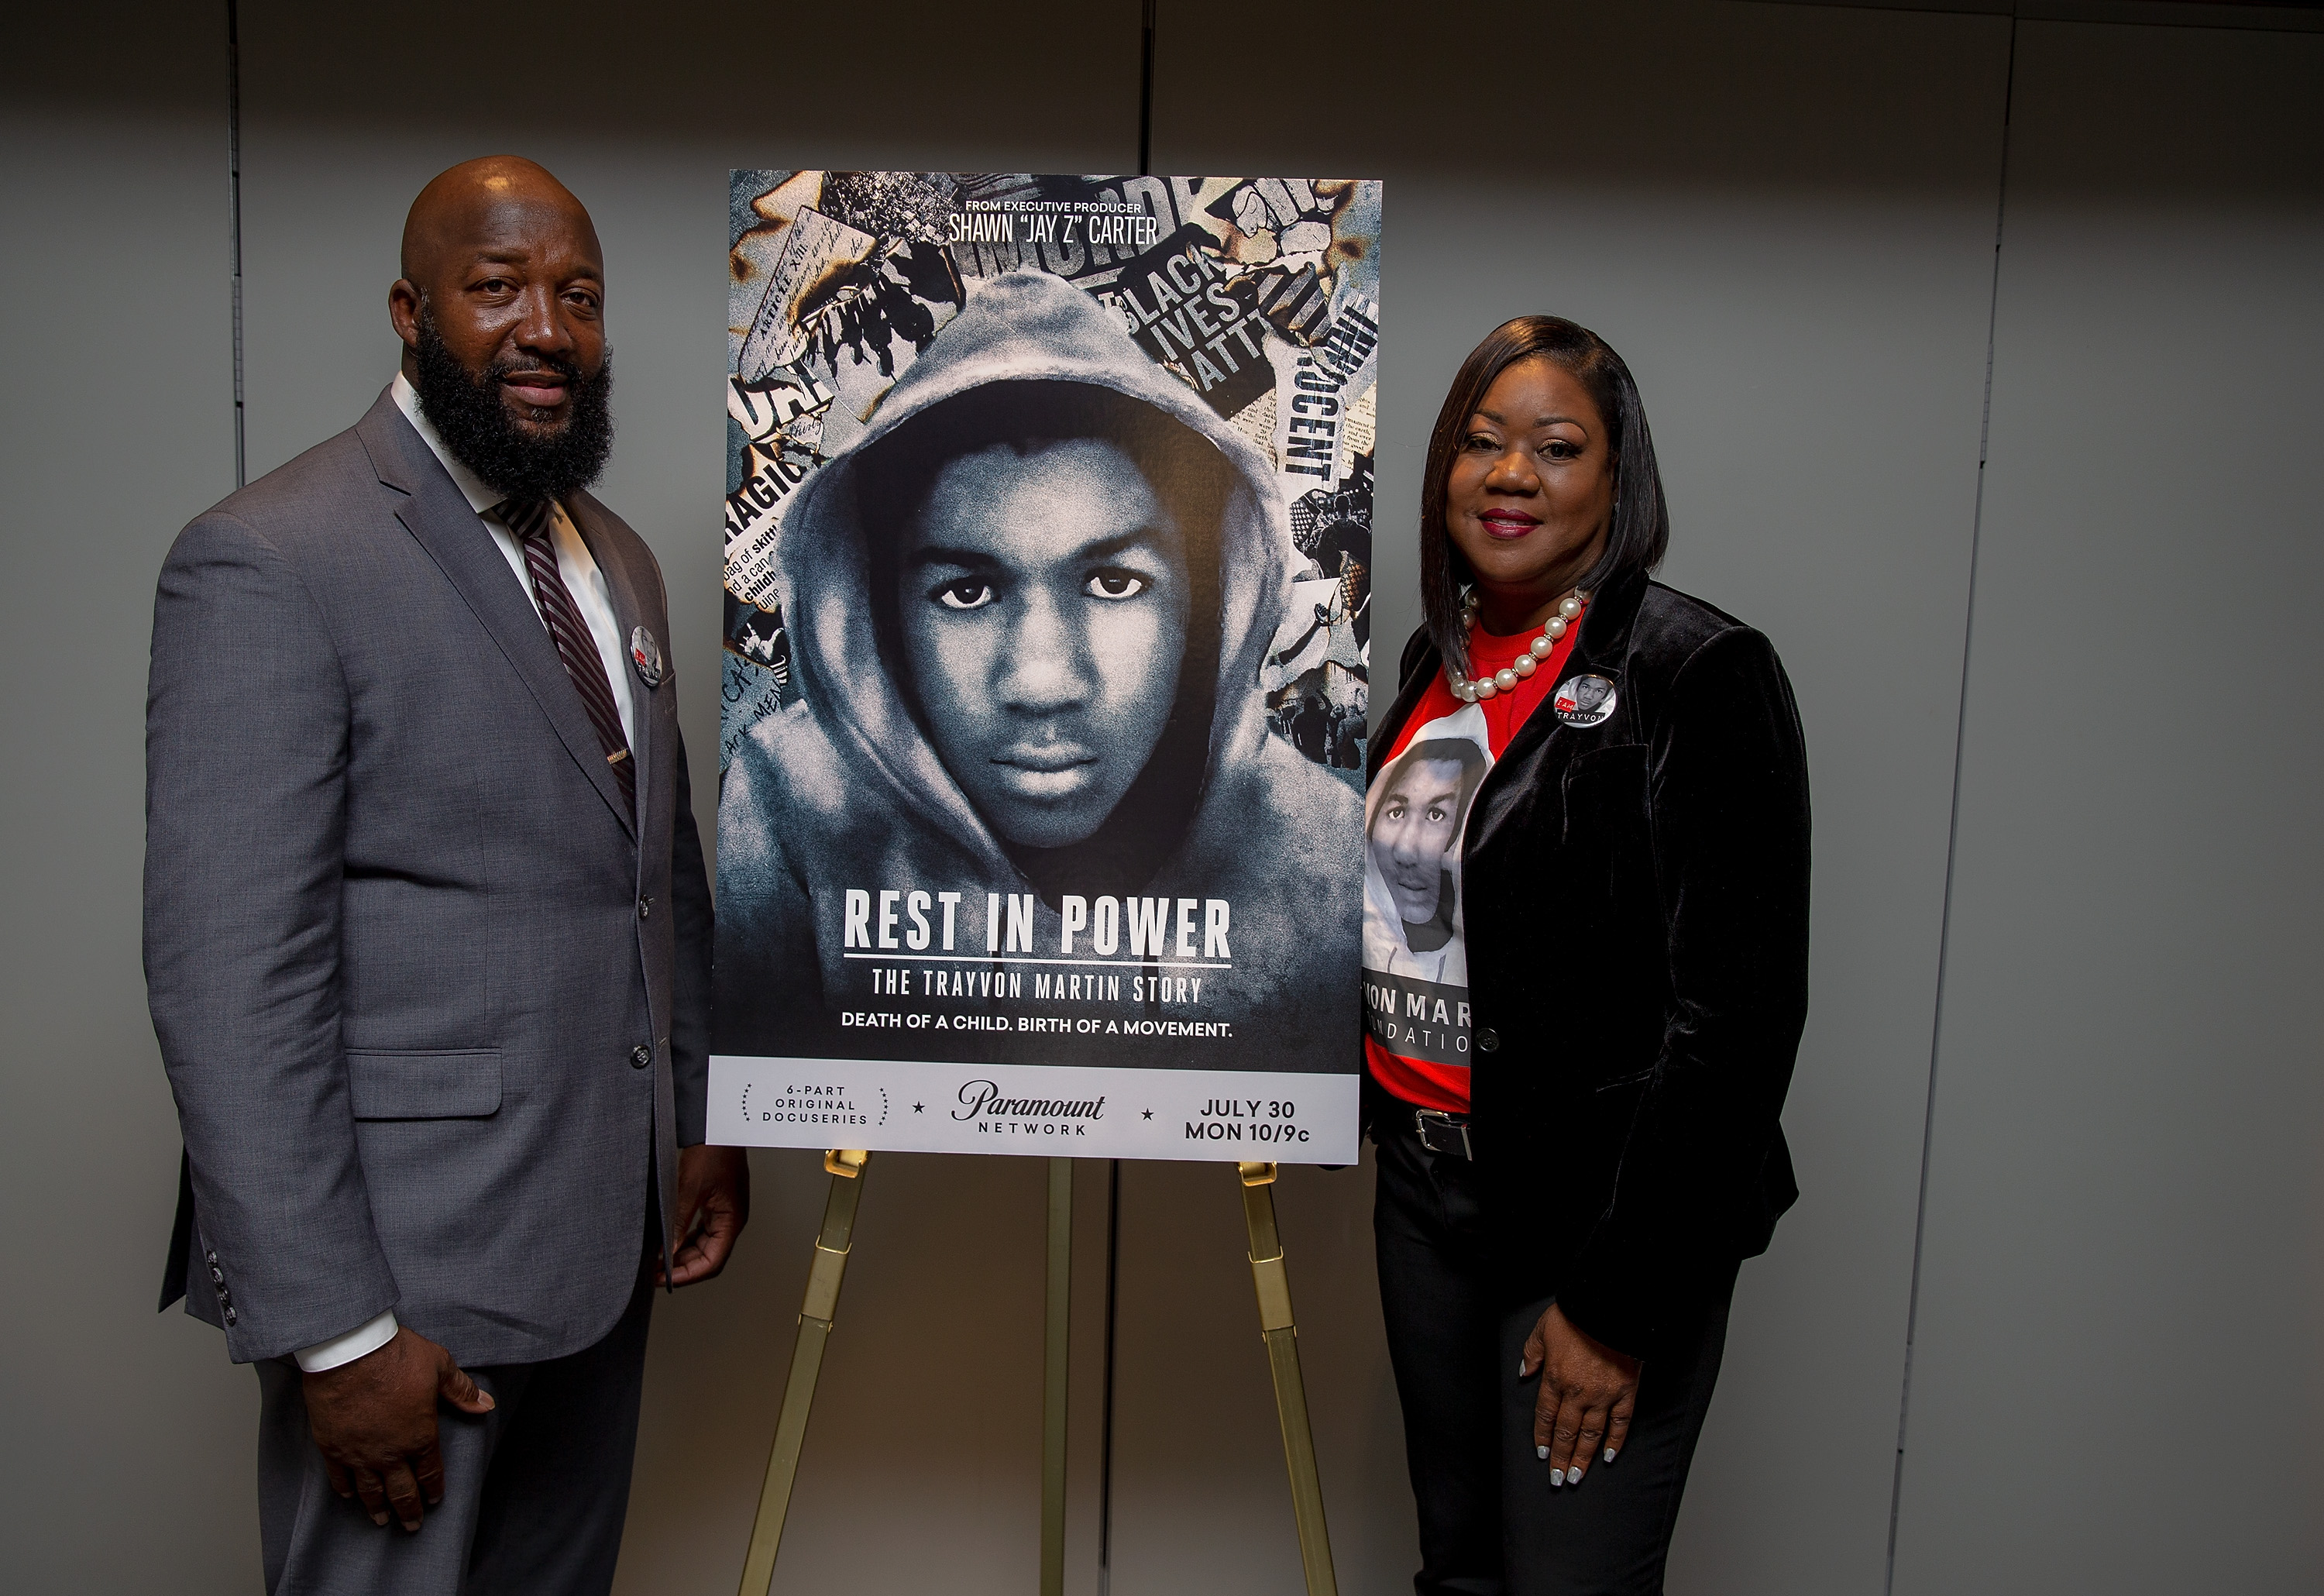 The Trailer For The 'Rest In Power The Trayvon Martin Story' Is Here